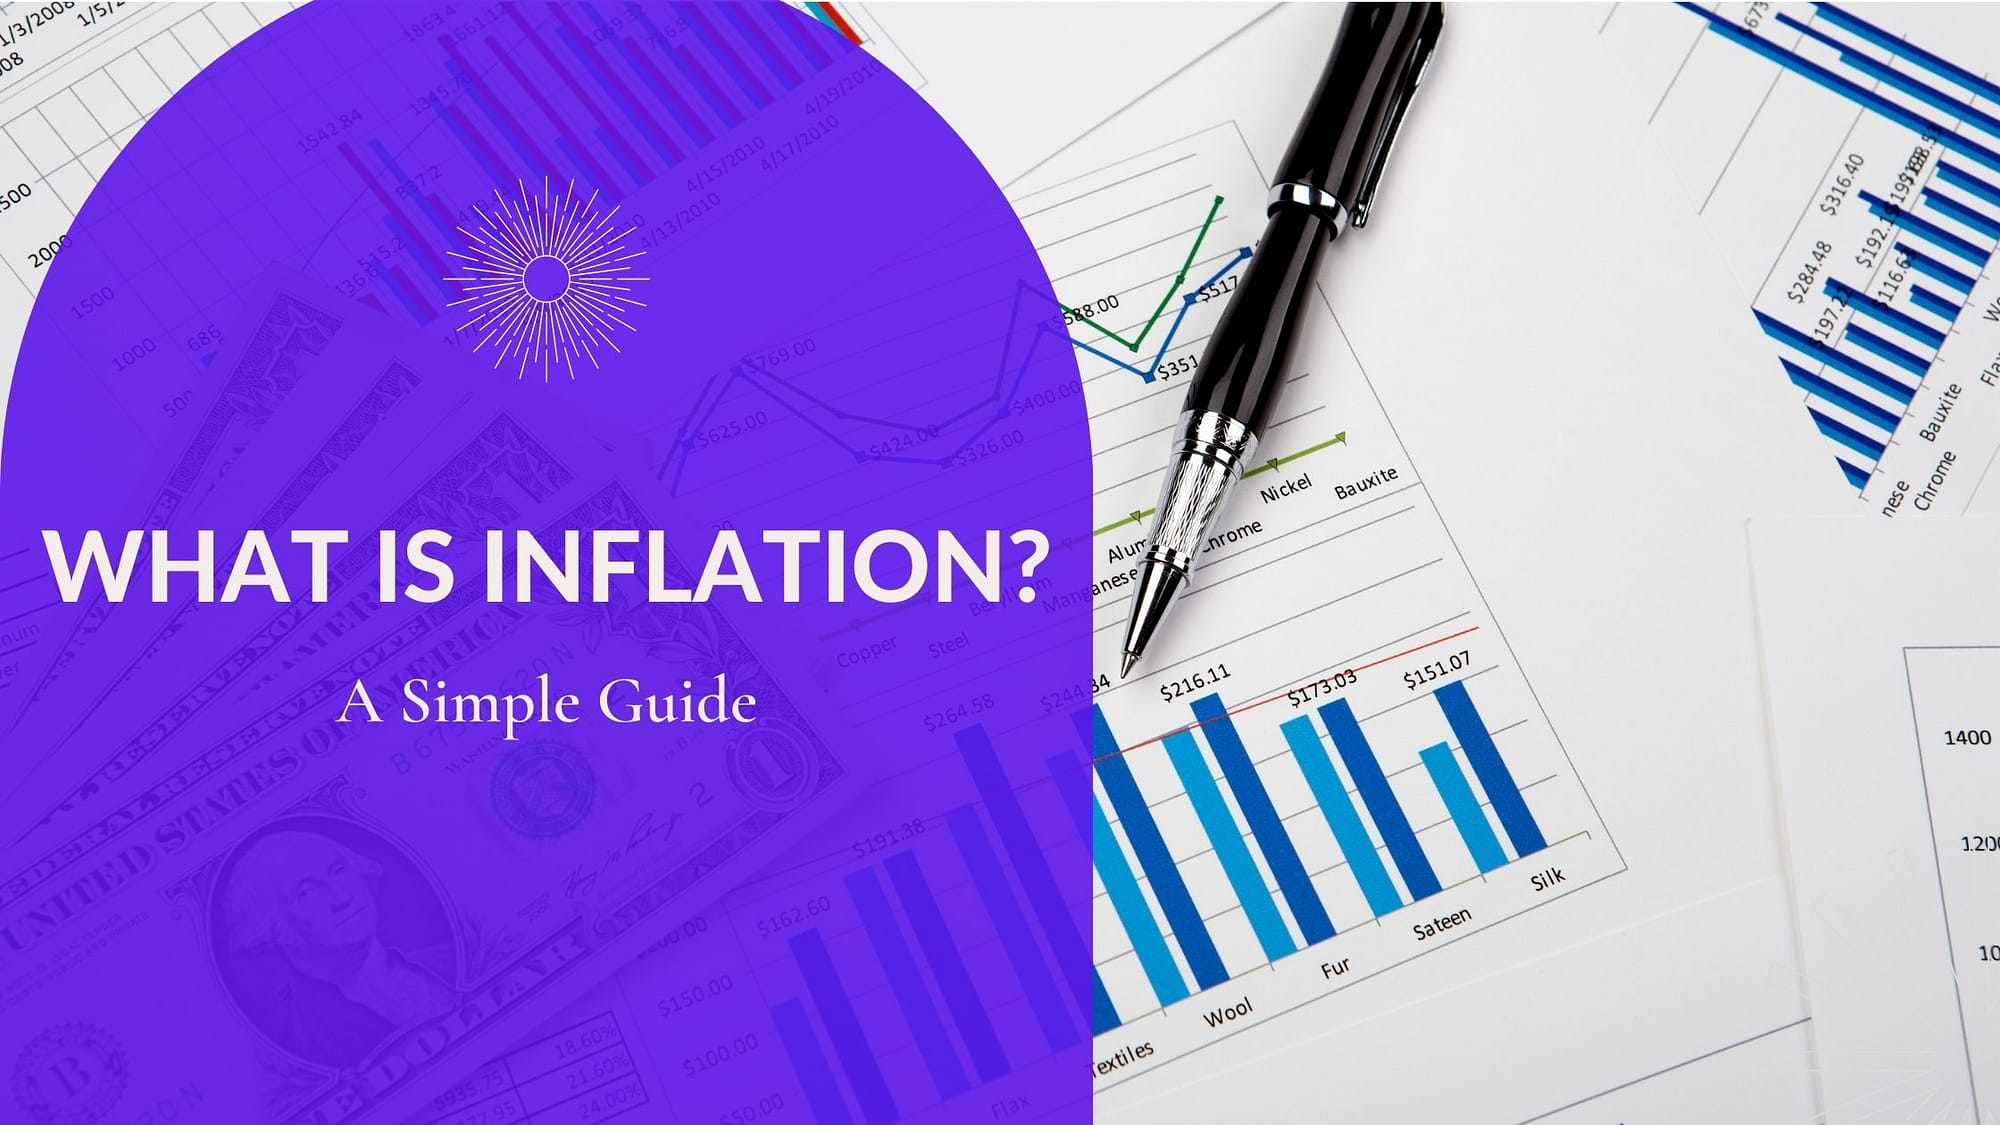 What is inflation in economics?